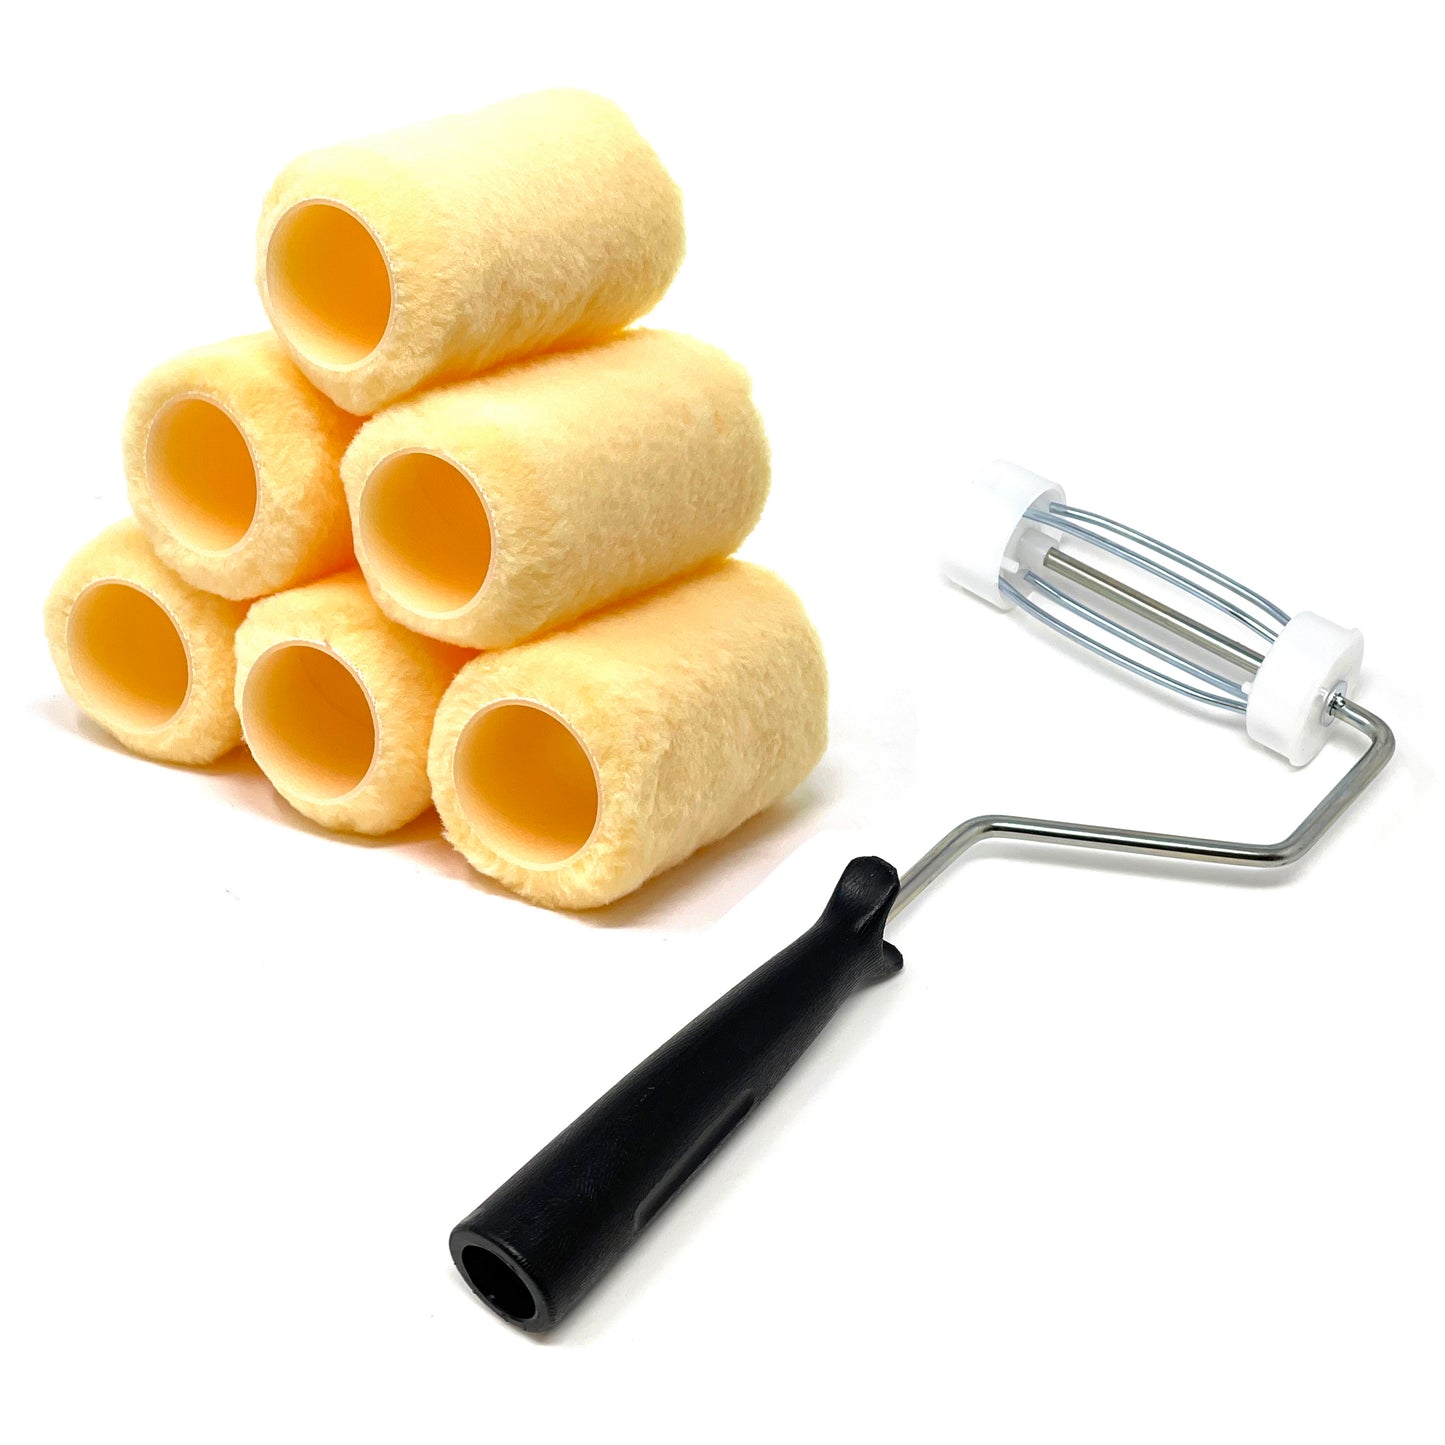 Allgala Paint Roller 4 Inch Shed-less Lint-free Roller Covers (Optional Roller Frame)